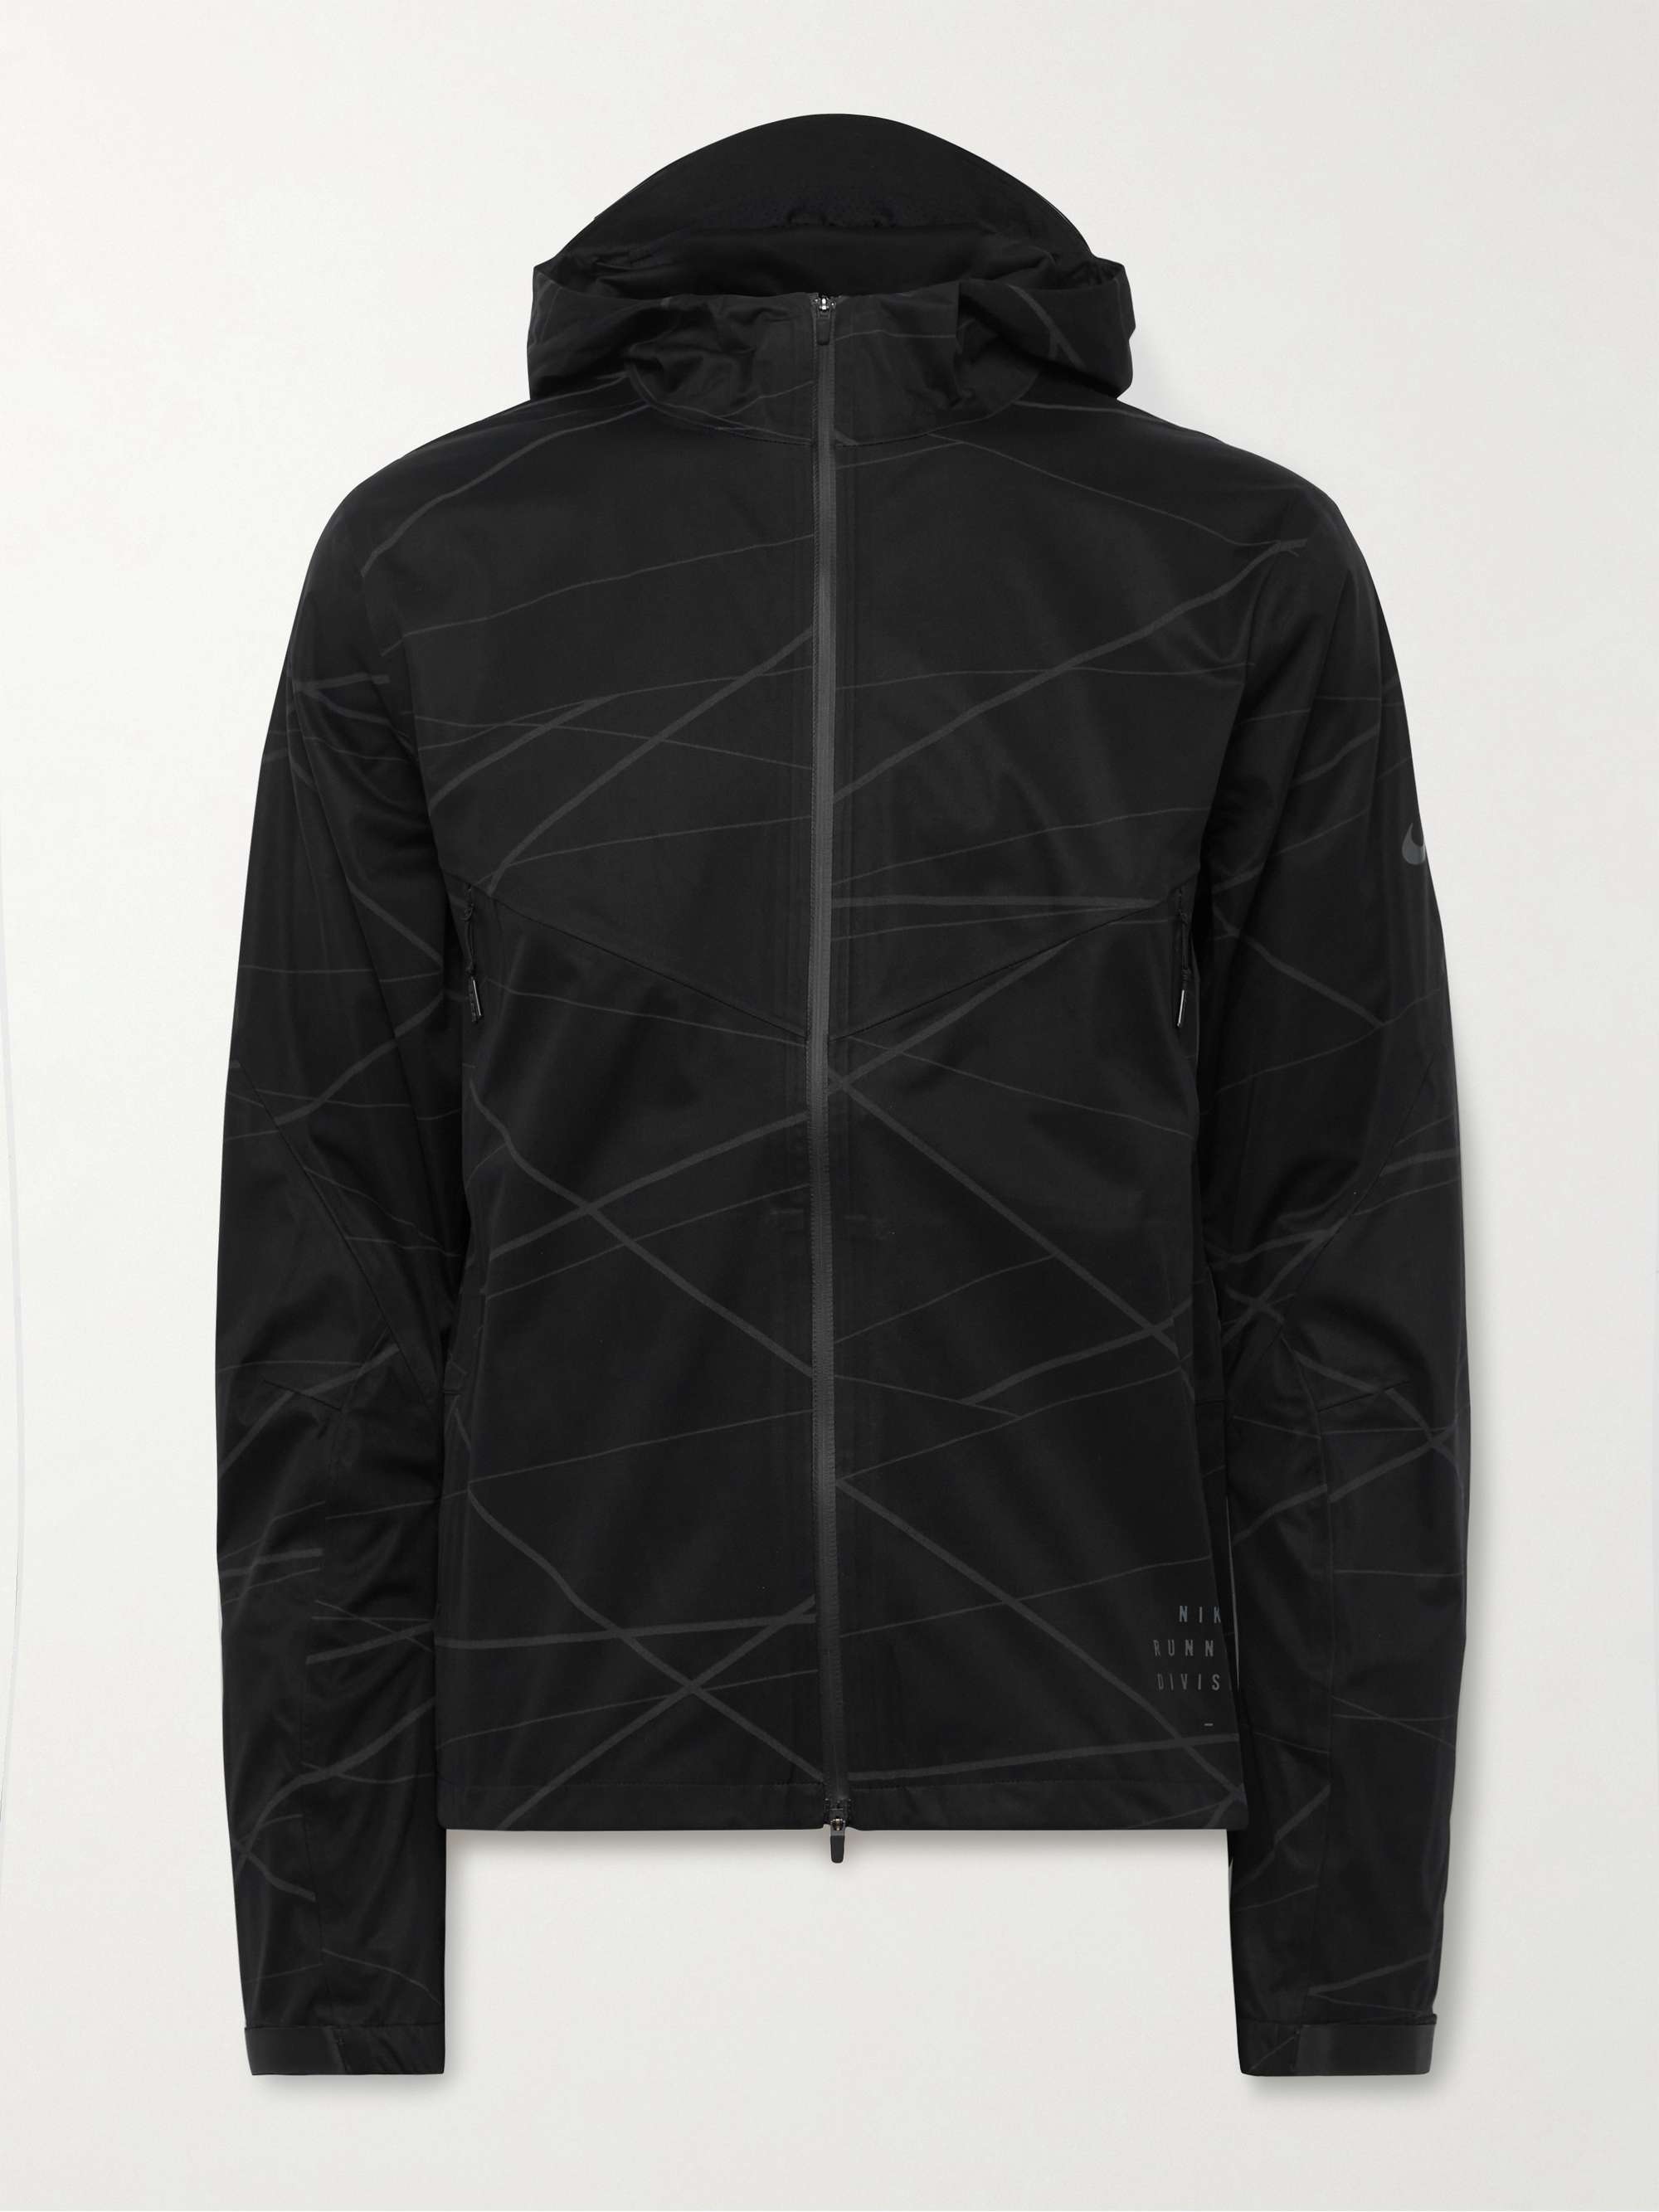 NIKE RUNNING Run Division Printed Storm-FIT Hooded Jacket | MR PORTER